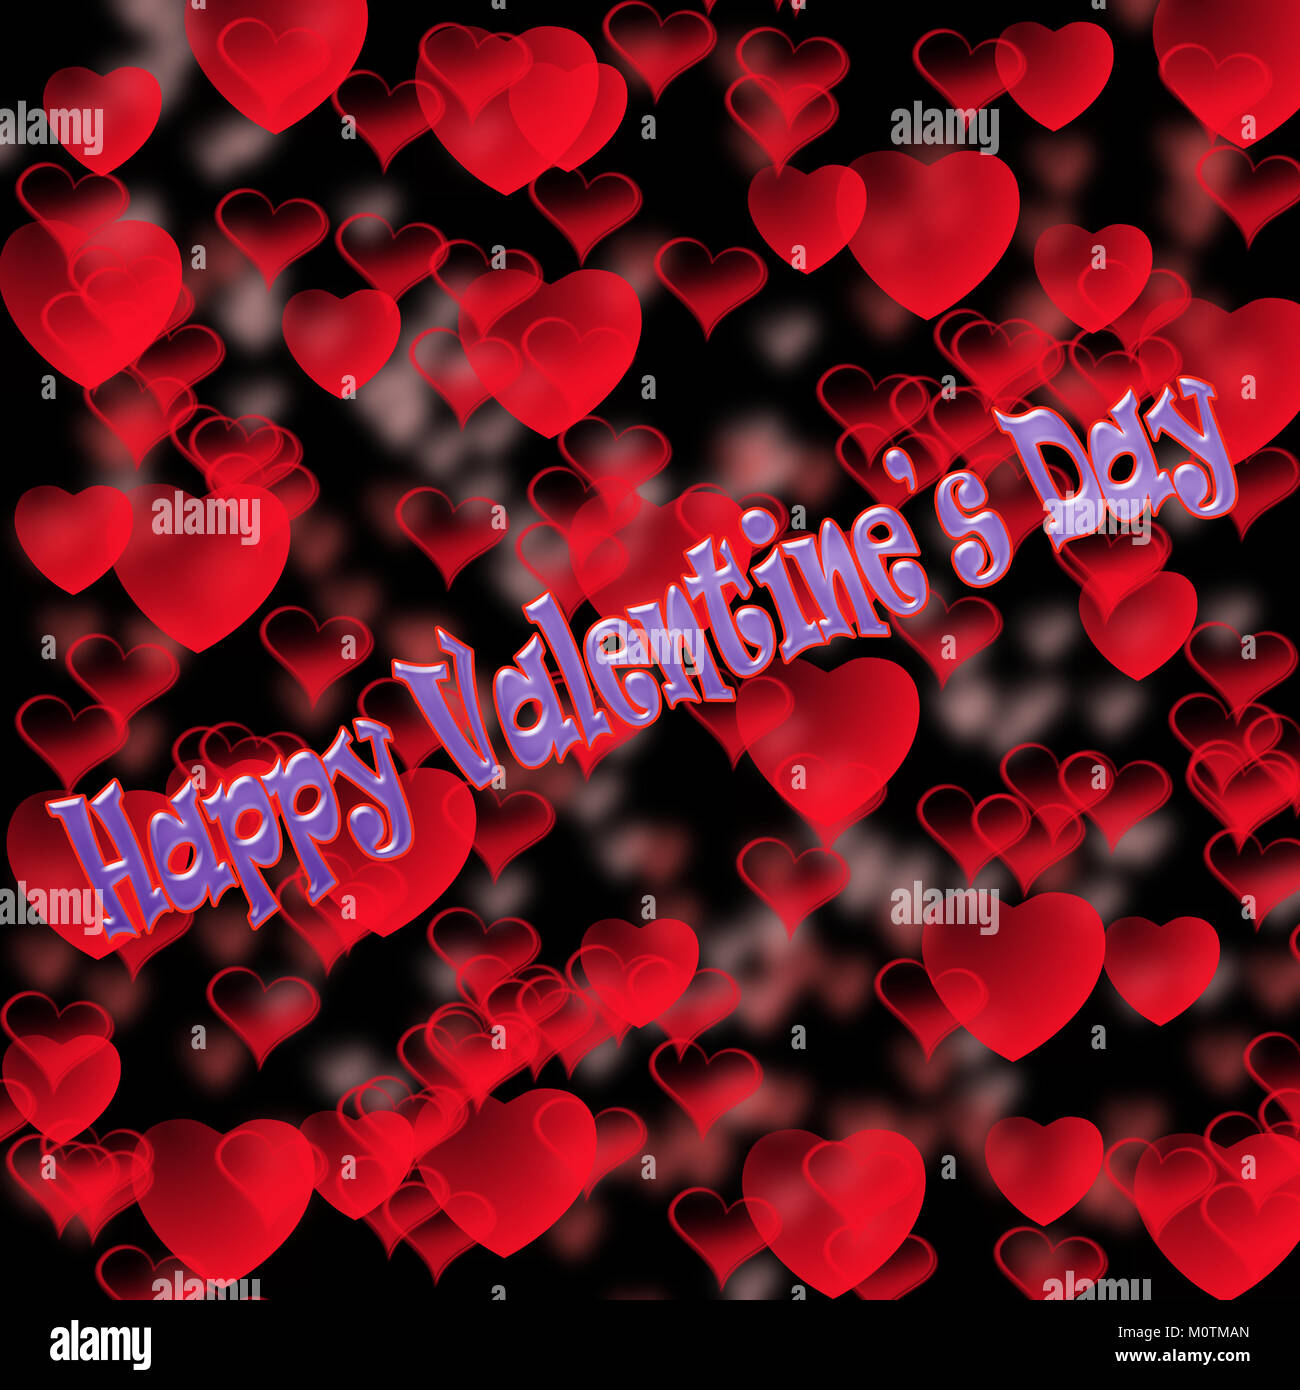 Happy Valentine's Day Banque D'Images